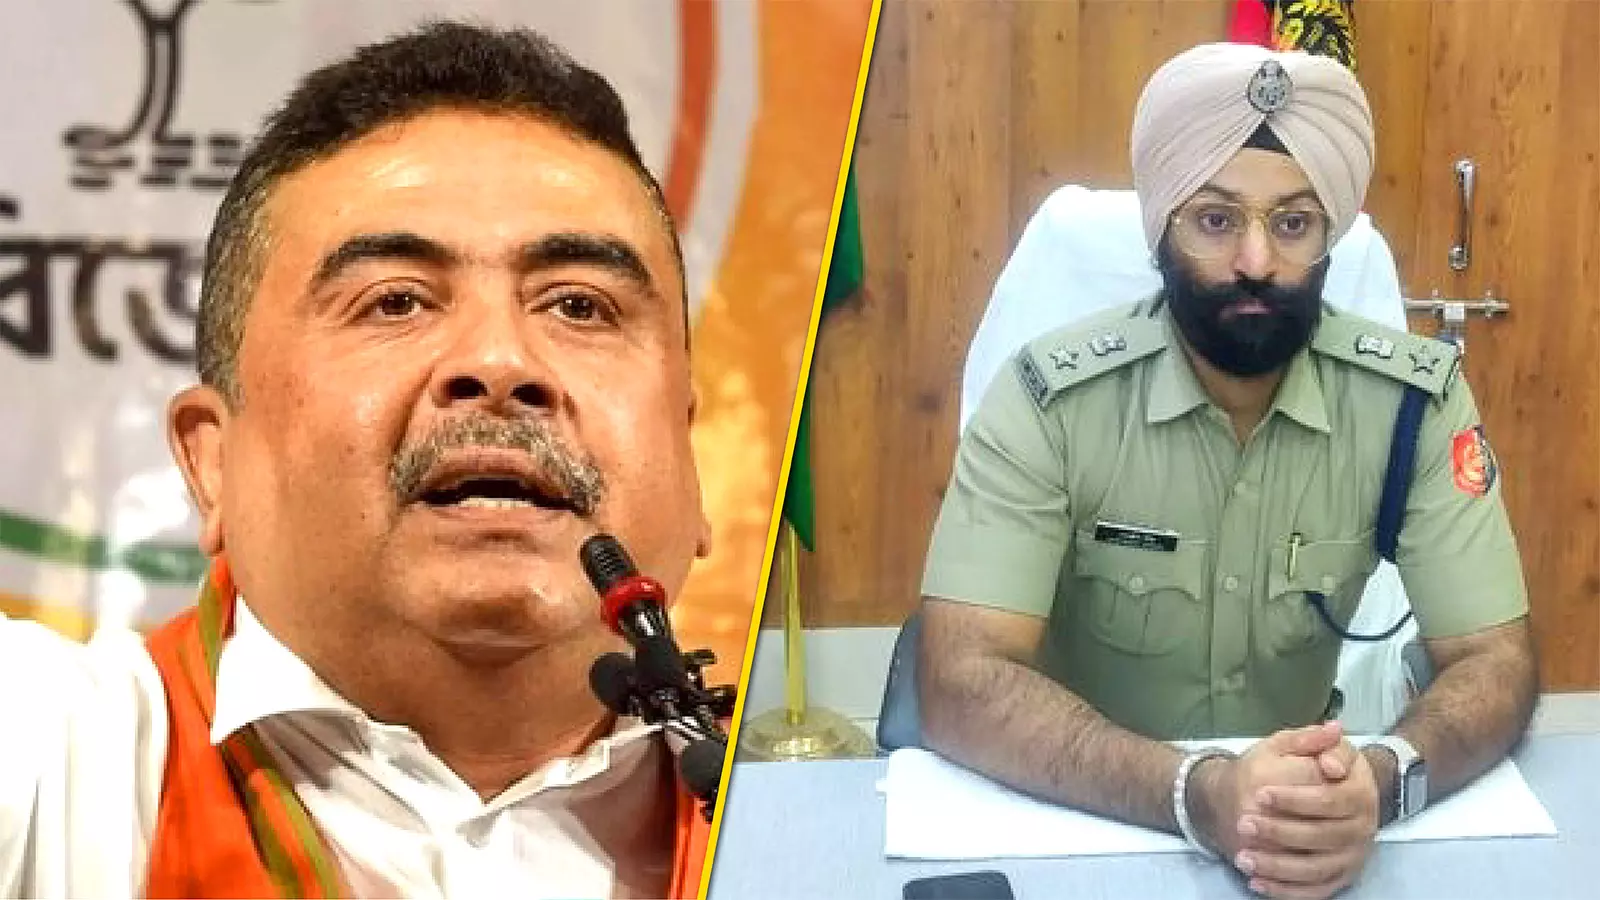 Khalistani slur row: Bengal police political pawns, dont lecture us, says BJP; Sikhs protest in Kolkata